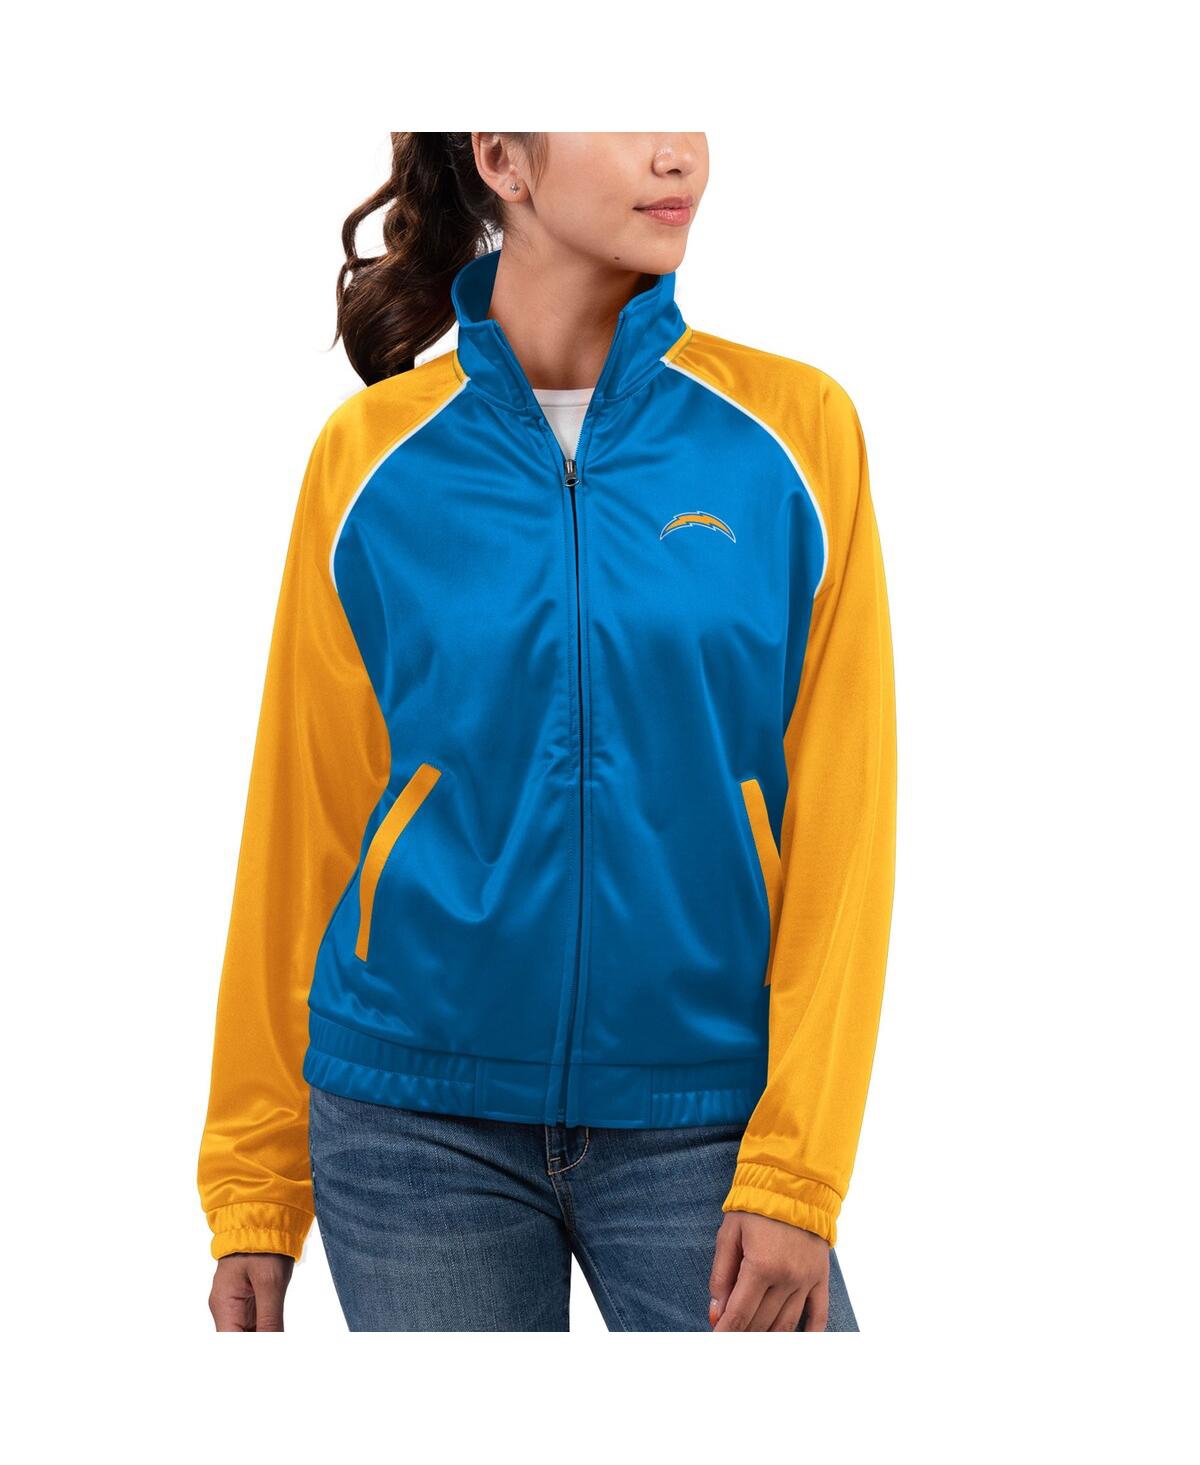 G-iii 4her By Carl Banks Women's  Powder Blue Los Angeles Chargers Showup Fashion Dolman Full-zip Tra